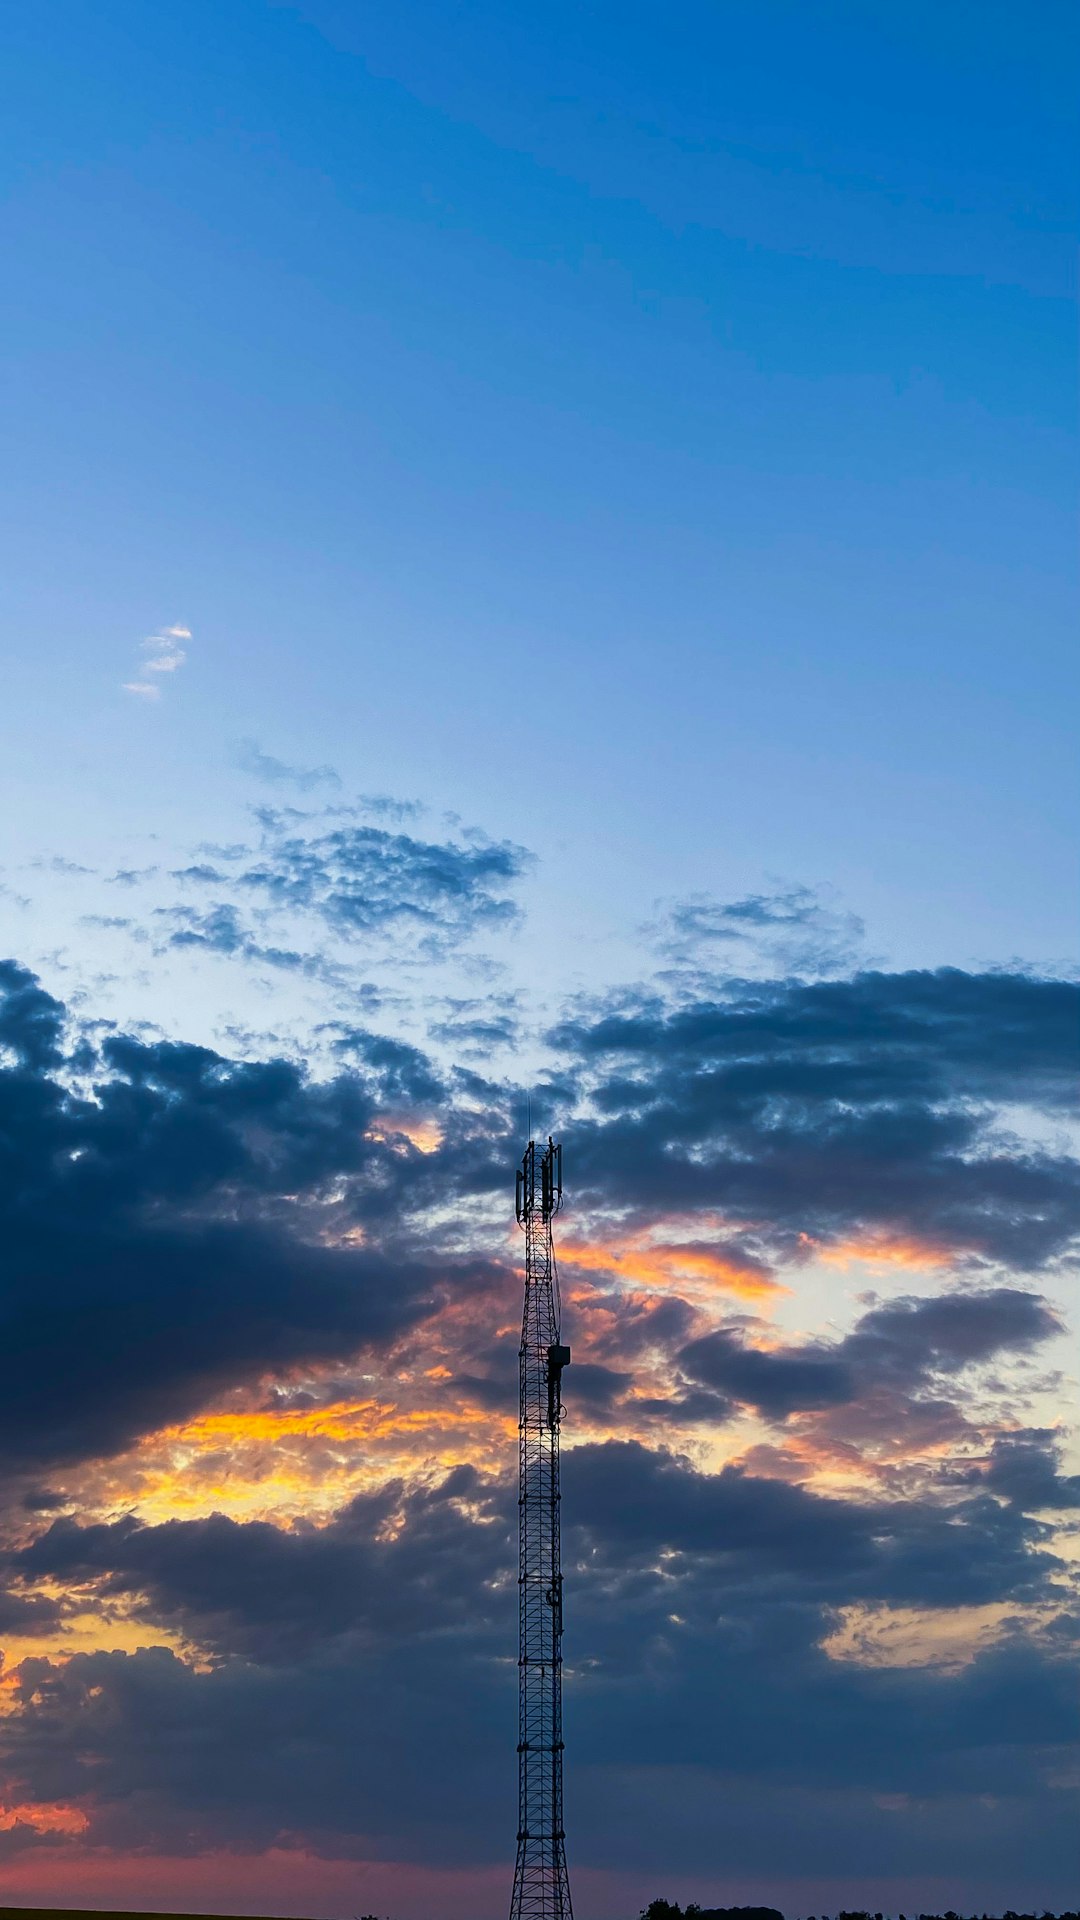 silhouette of tower under cloudy sky during sunset